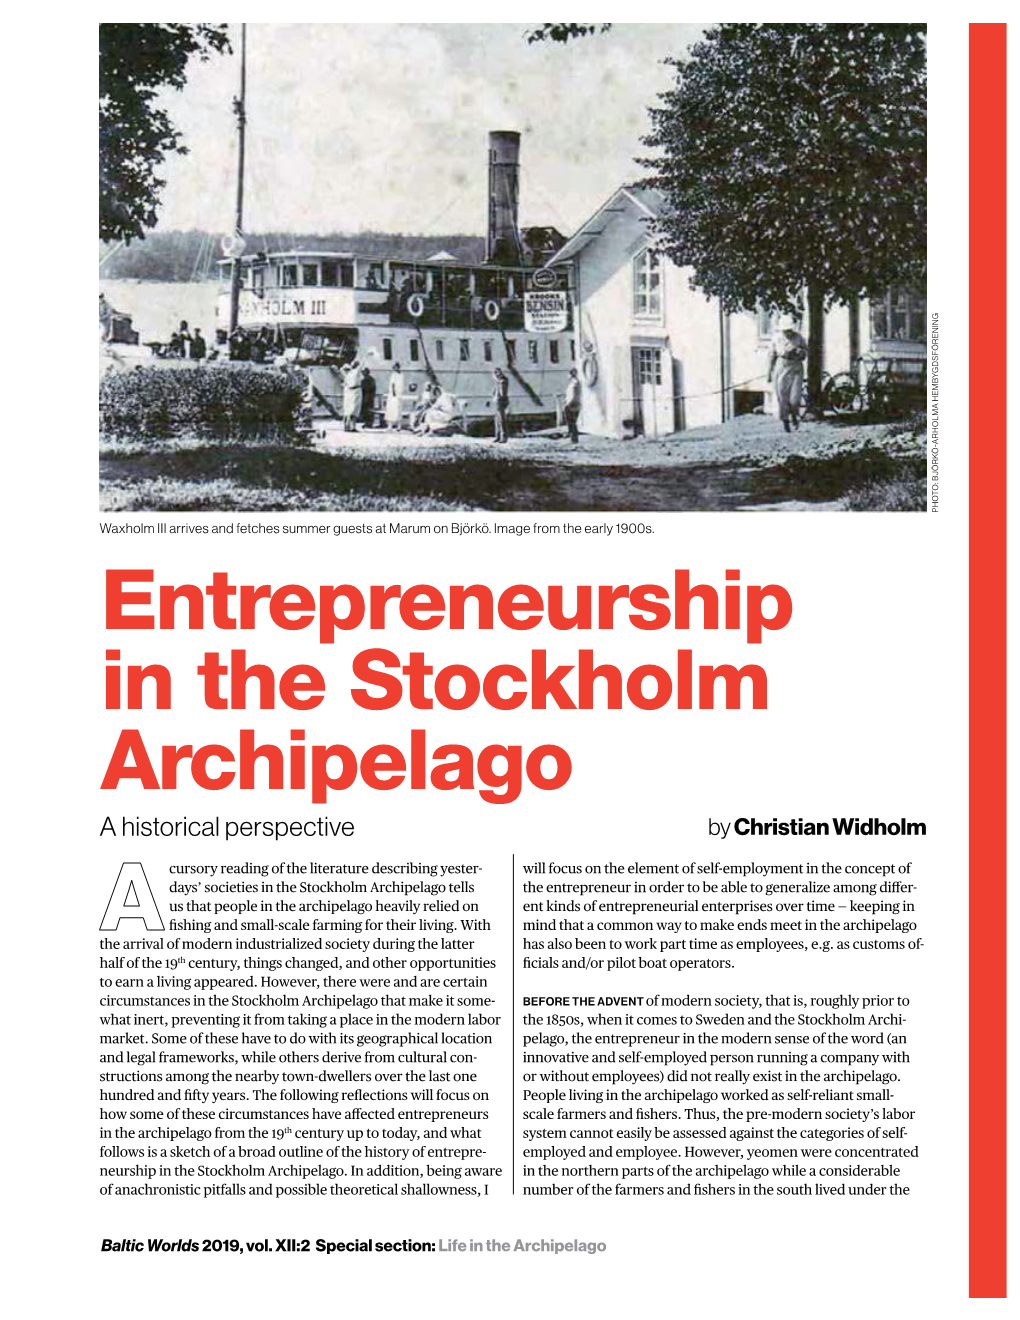 Entrepreneurship in the Stockholm Archipelago a Historical Perspective by Christian Widholm